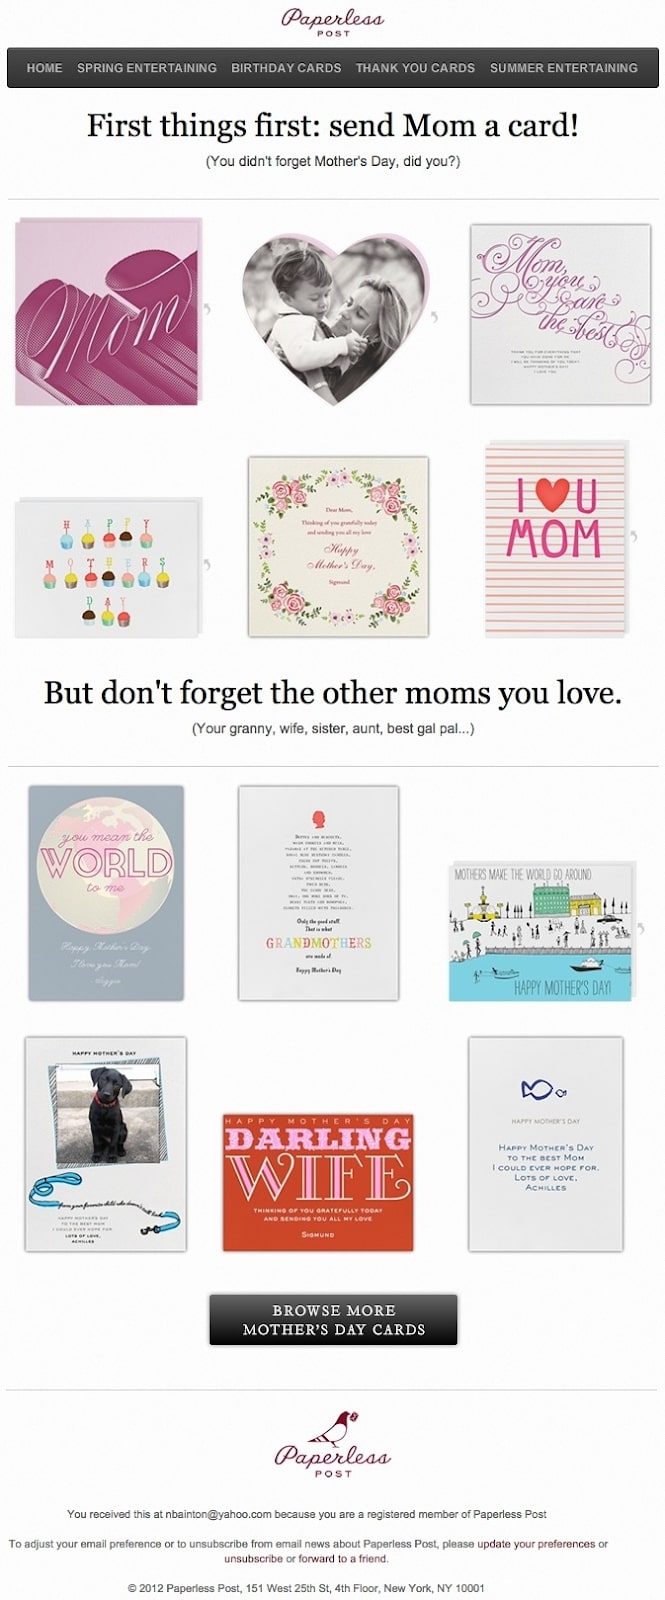 Paperless's Mother Day email marketing campaign